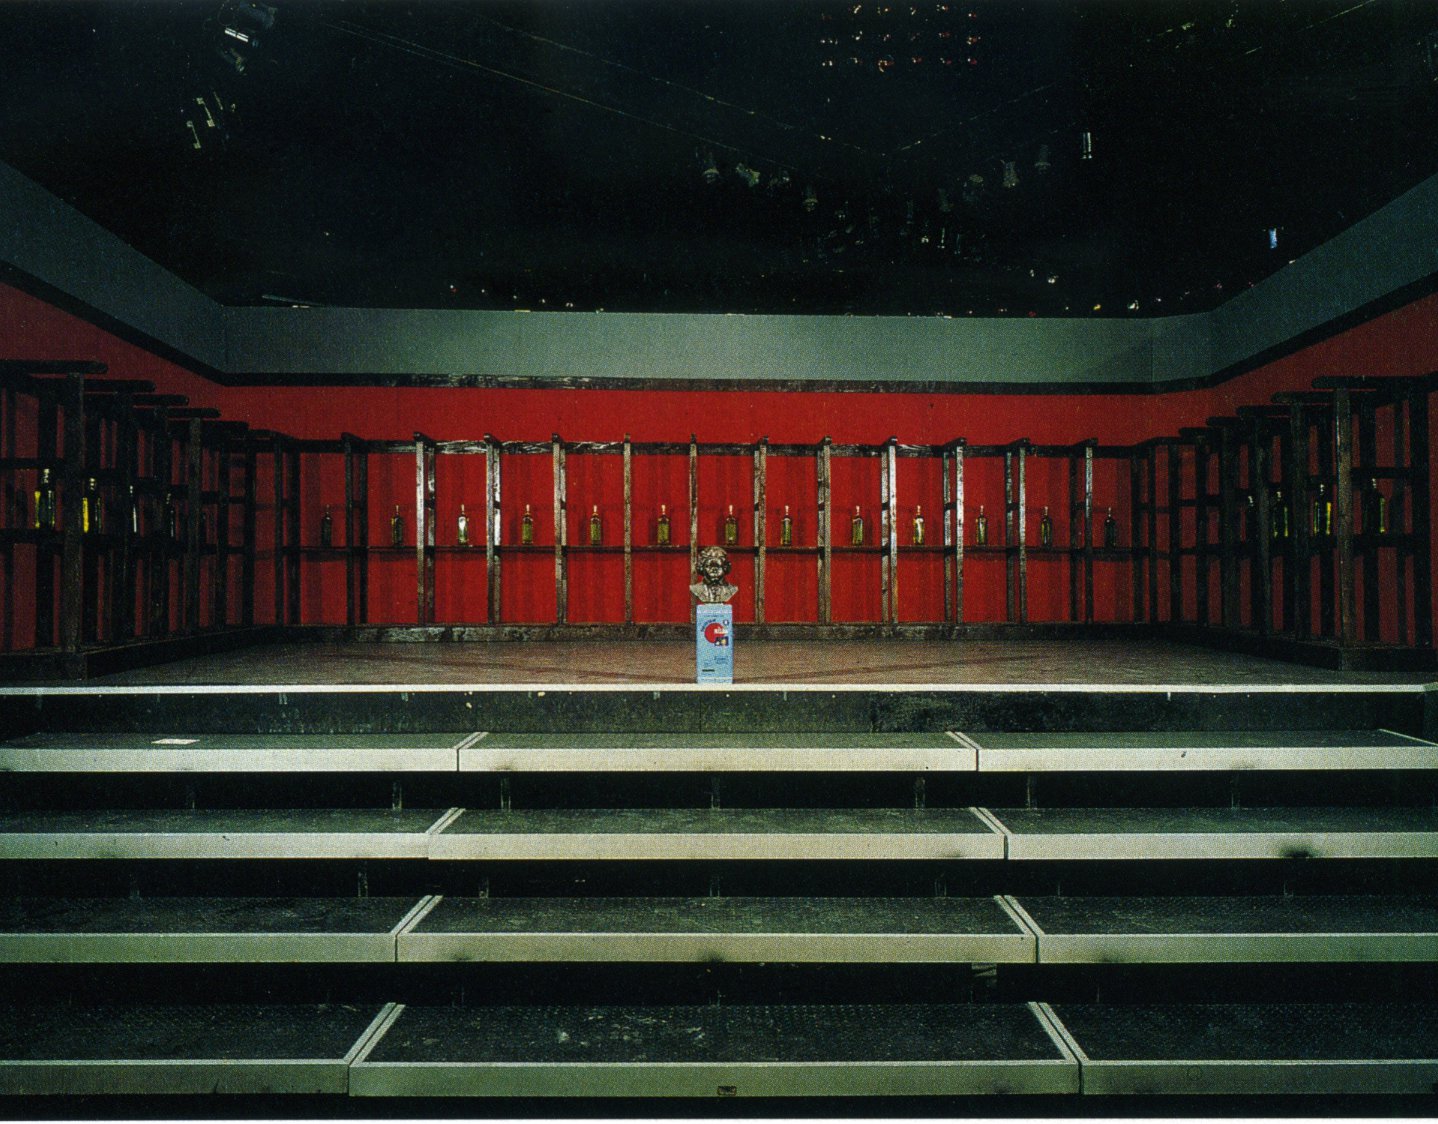 Thanasis Totsikas, Untitled, metal, red blankets, oil, wooden pews, 700 x 500 x 220 cm, 1988. Installation view, Hyper-product, Club 22, Athens, 1988